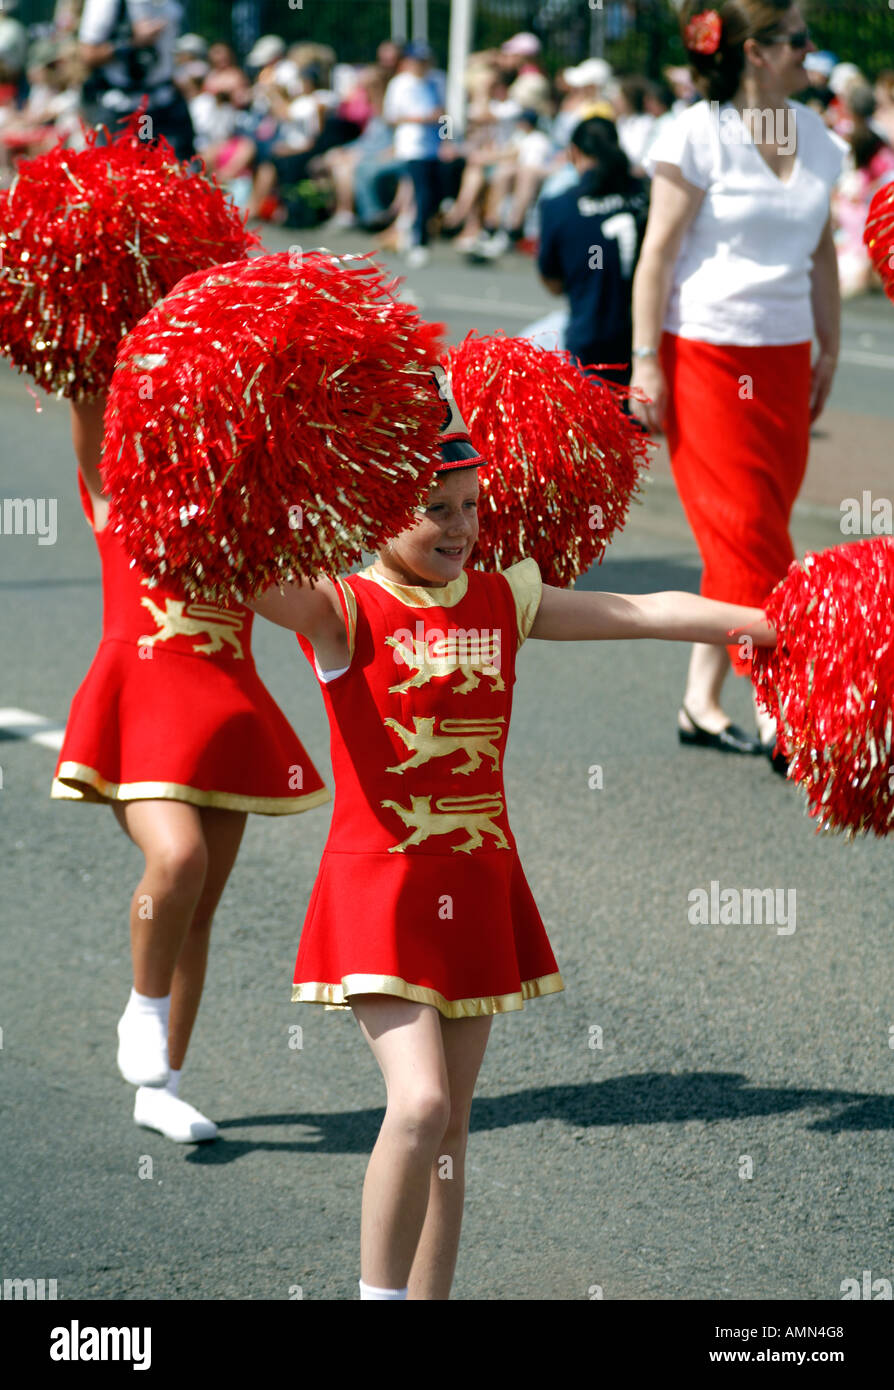 Young girl with marching band and Pom Poms Stock Photo - Alamy